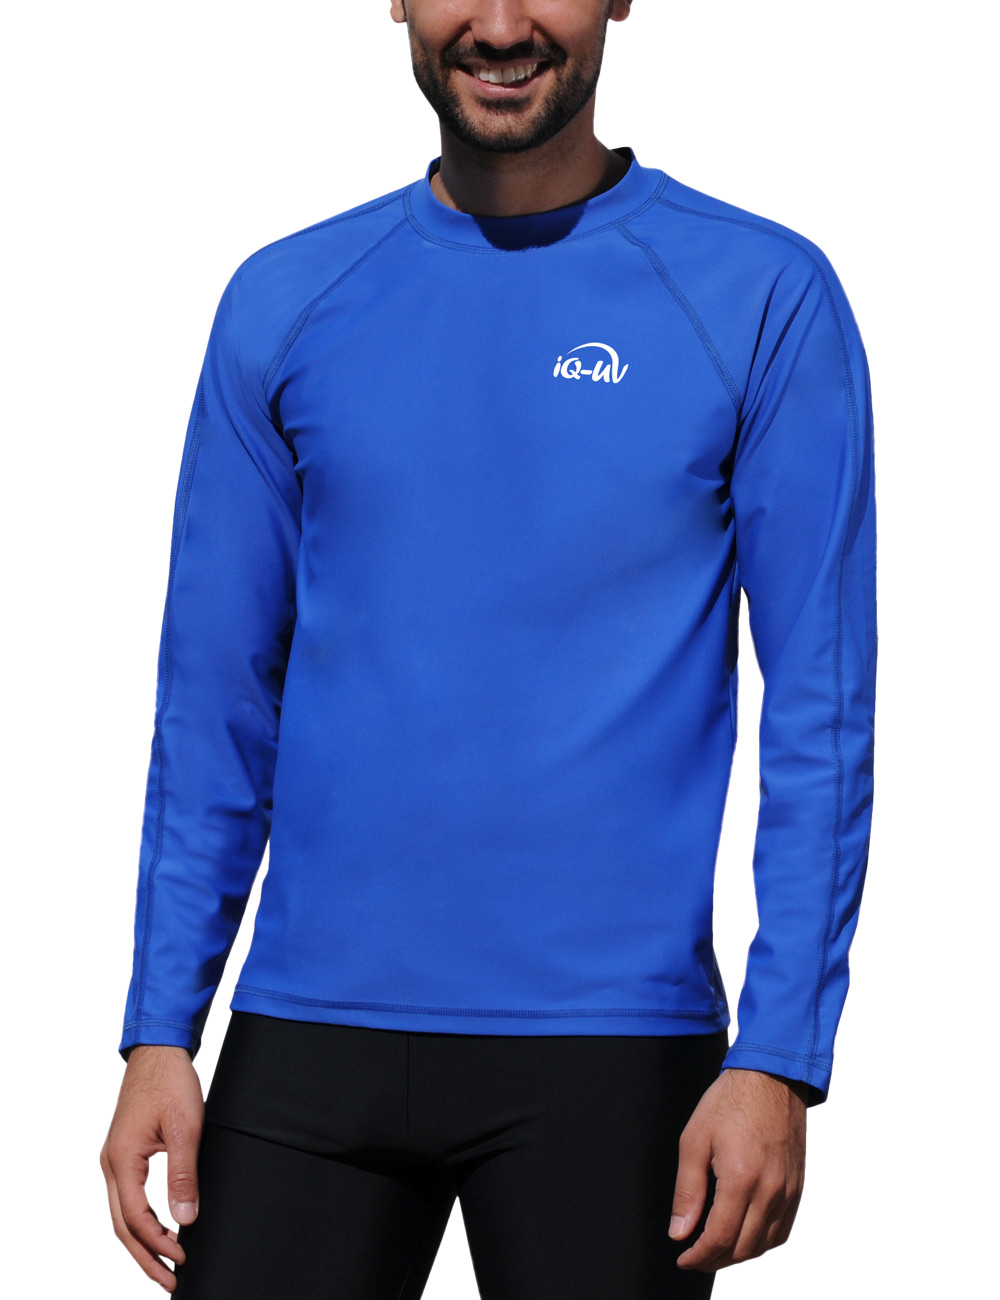 Men's Sun Protection Shirt Loose Fit Long Sleeve Beach and Water 